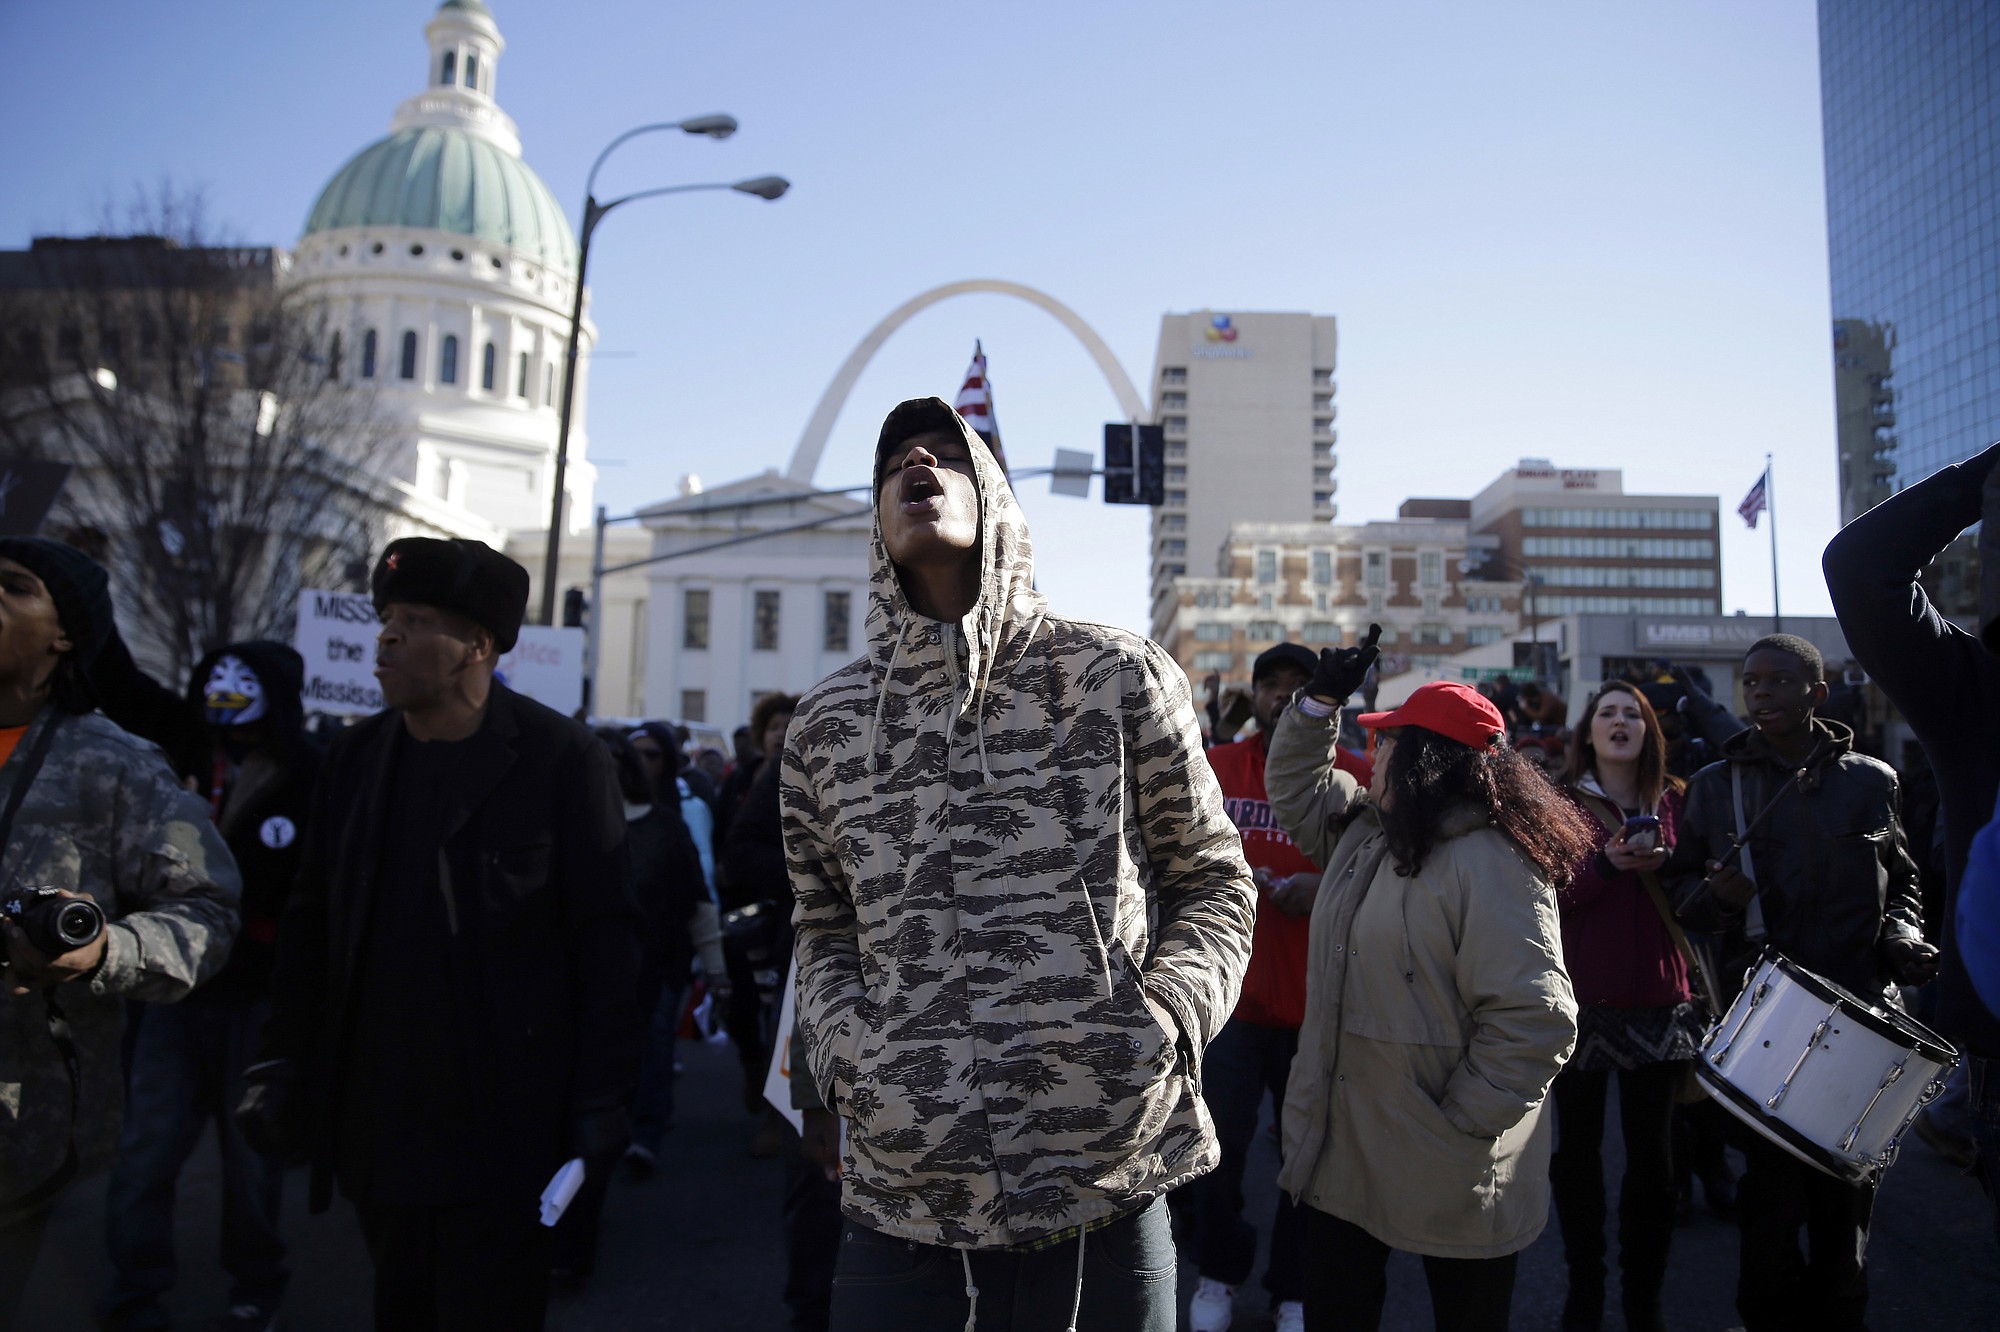 People chant while taking part in an annual march Monday honoring the Rev. Martin Luther King Jr. in St. Louis.